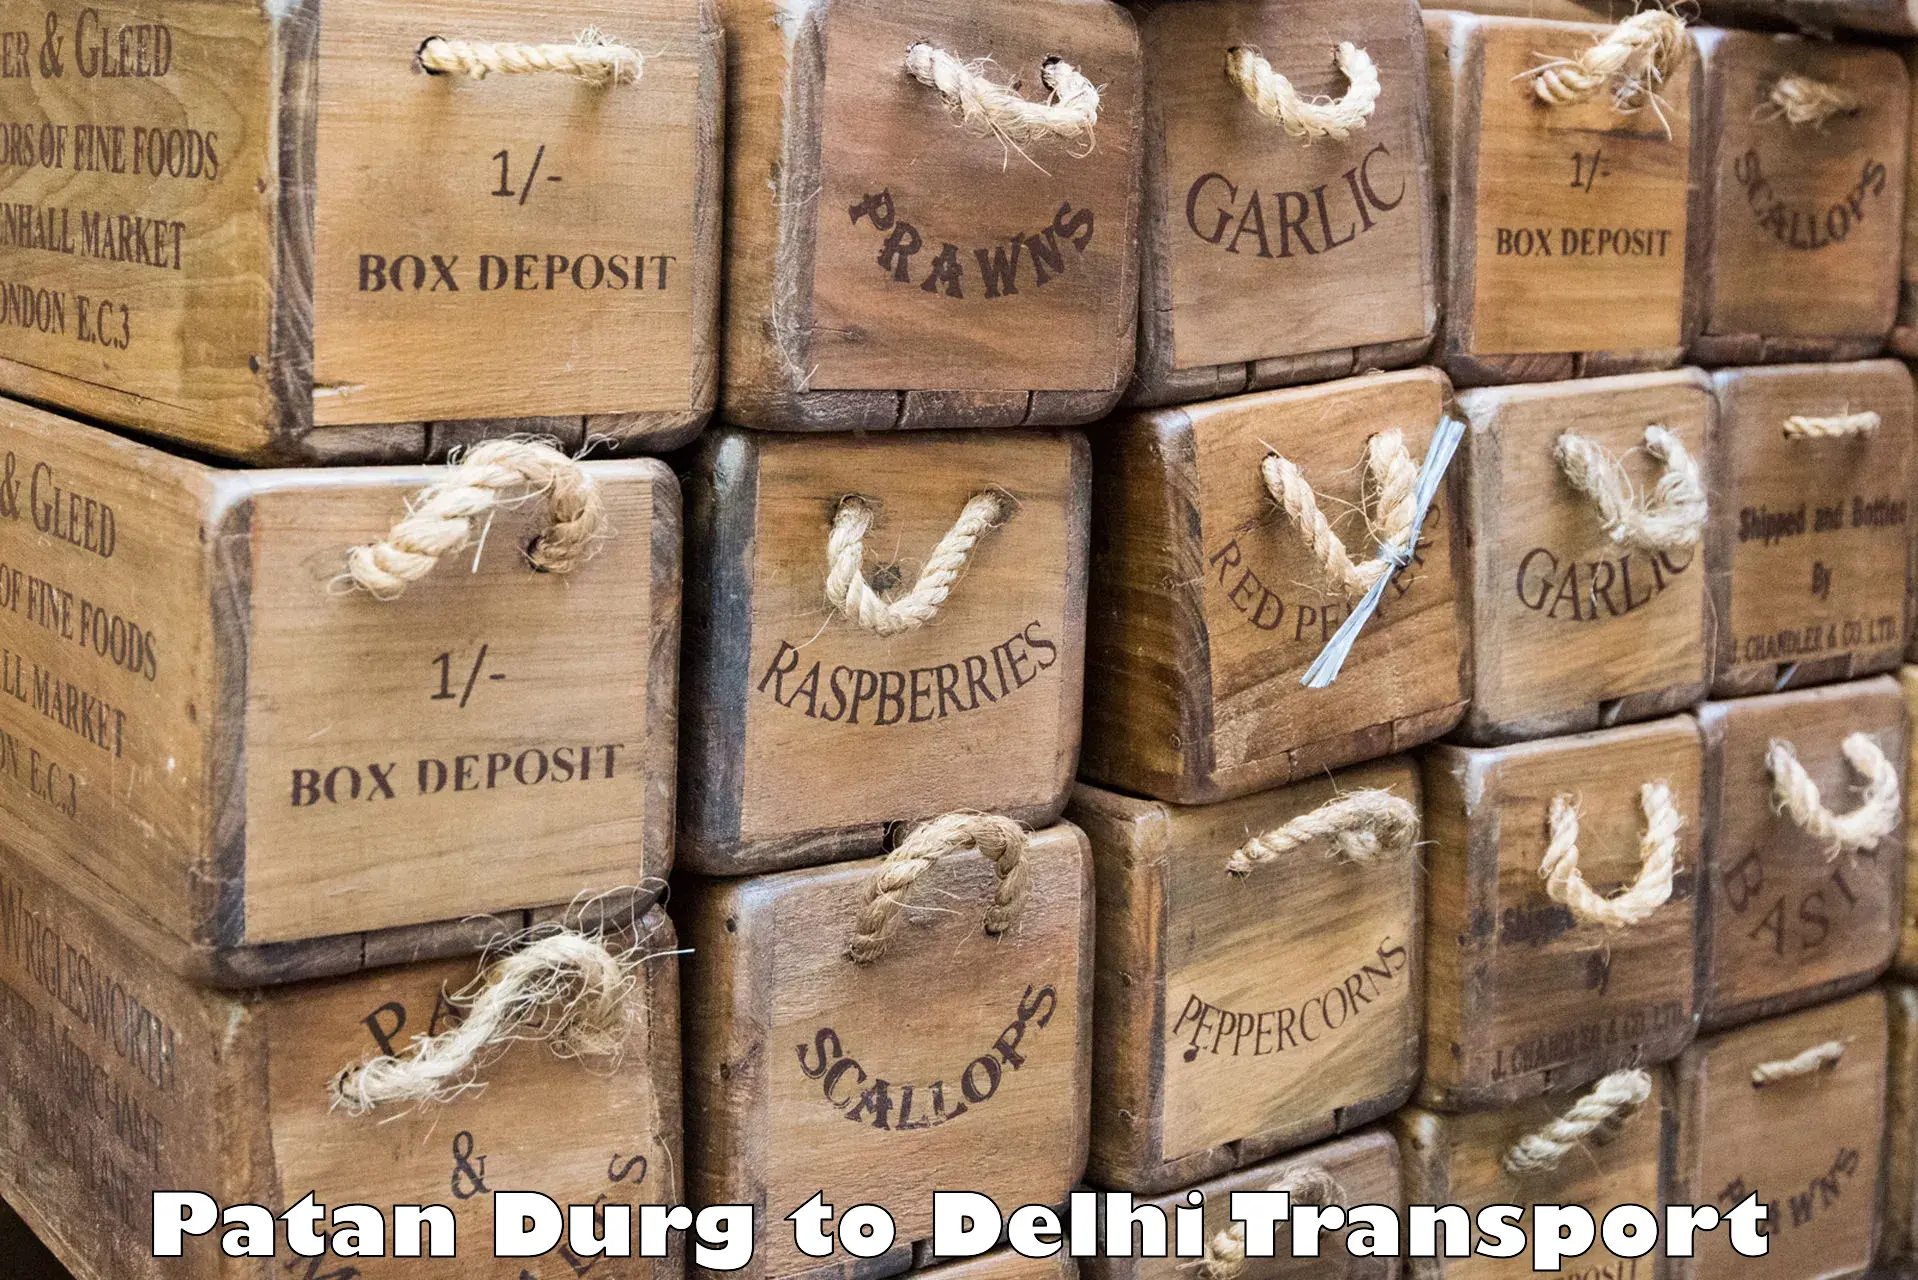 Delivery service Patan Durg to East Delhi